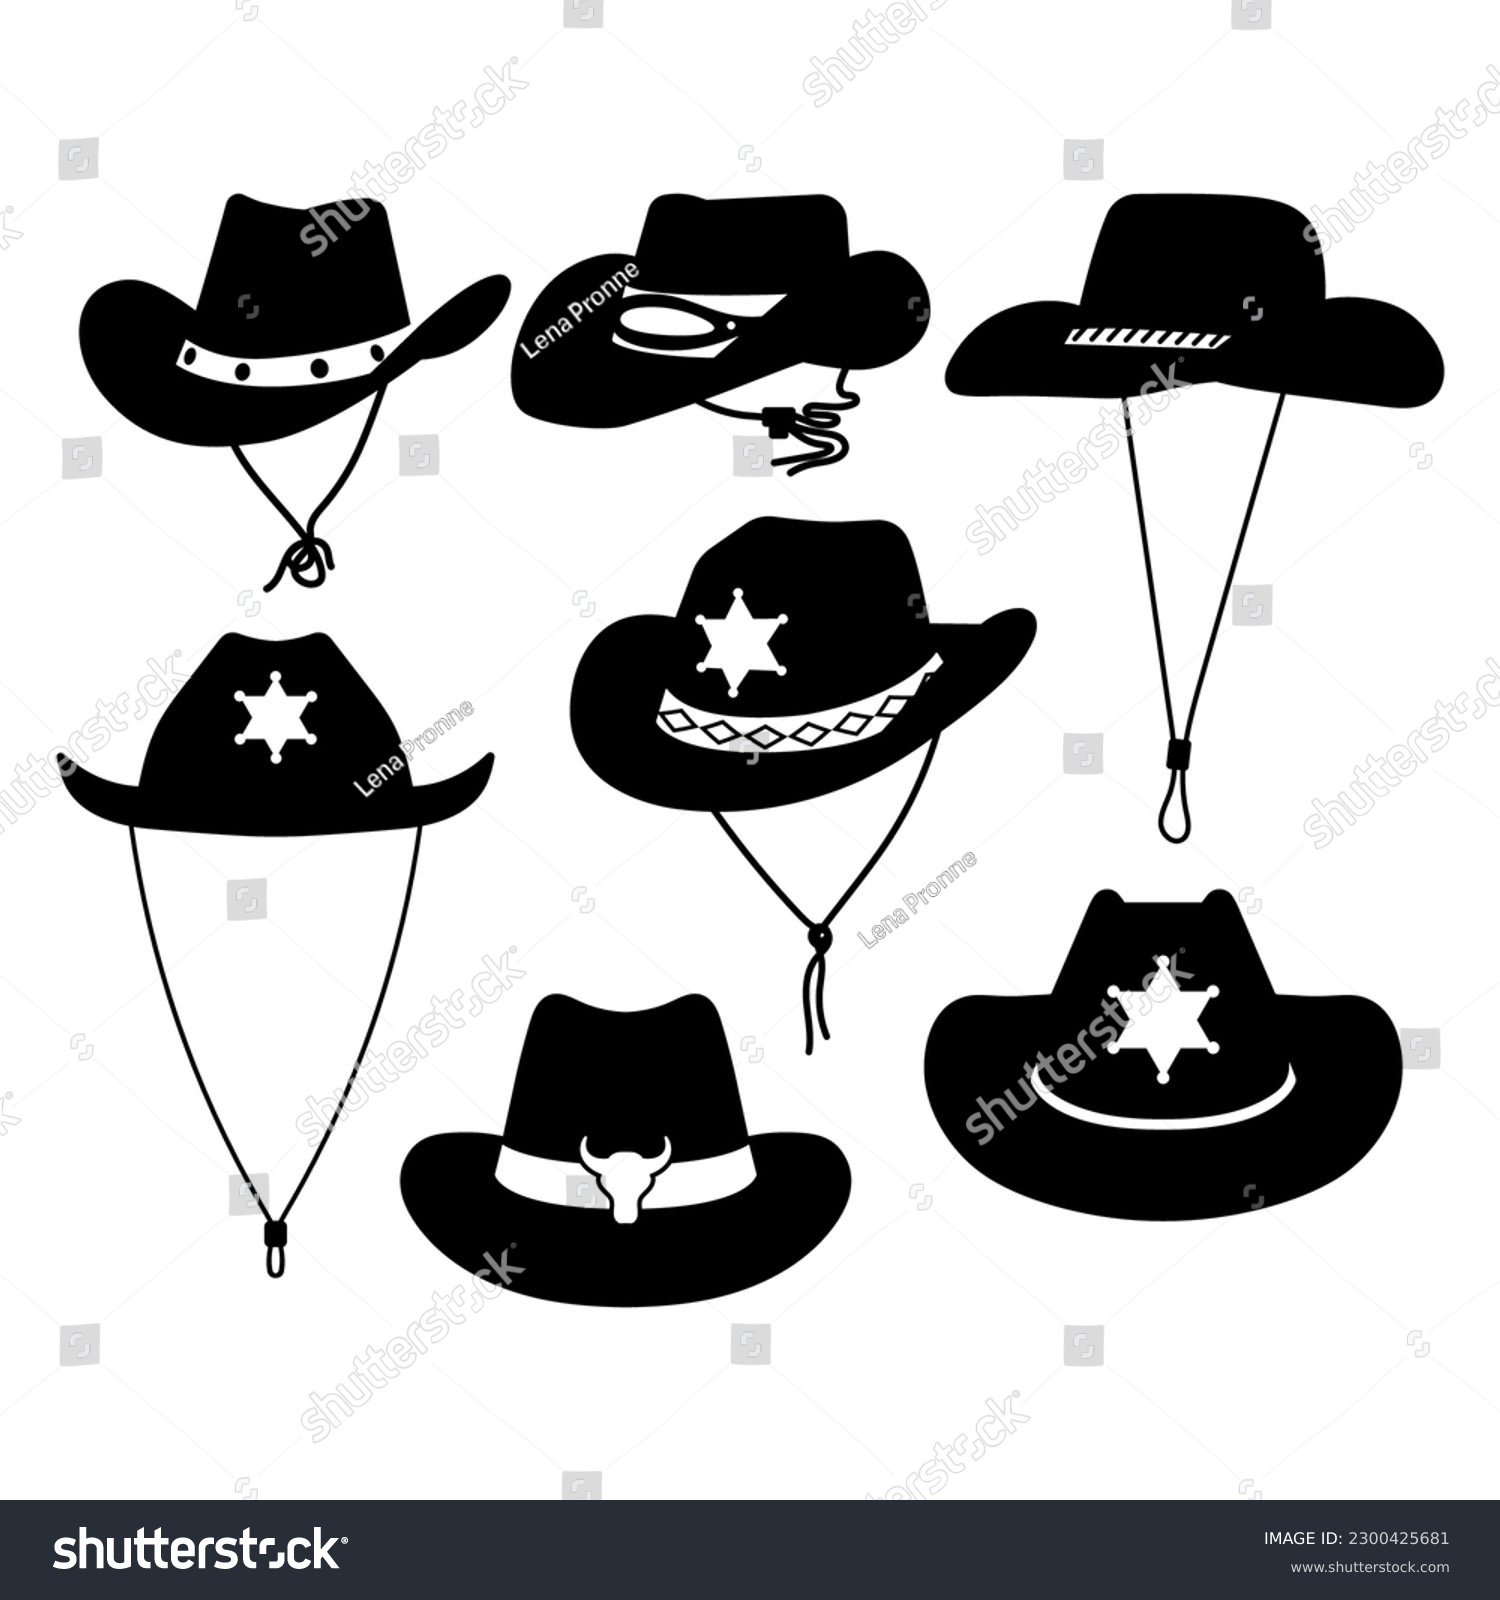 SVG of Cowboys hat silhouette templates for cutting programs clipart svg